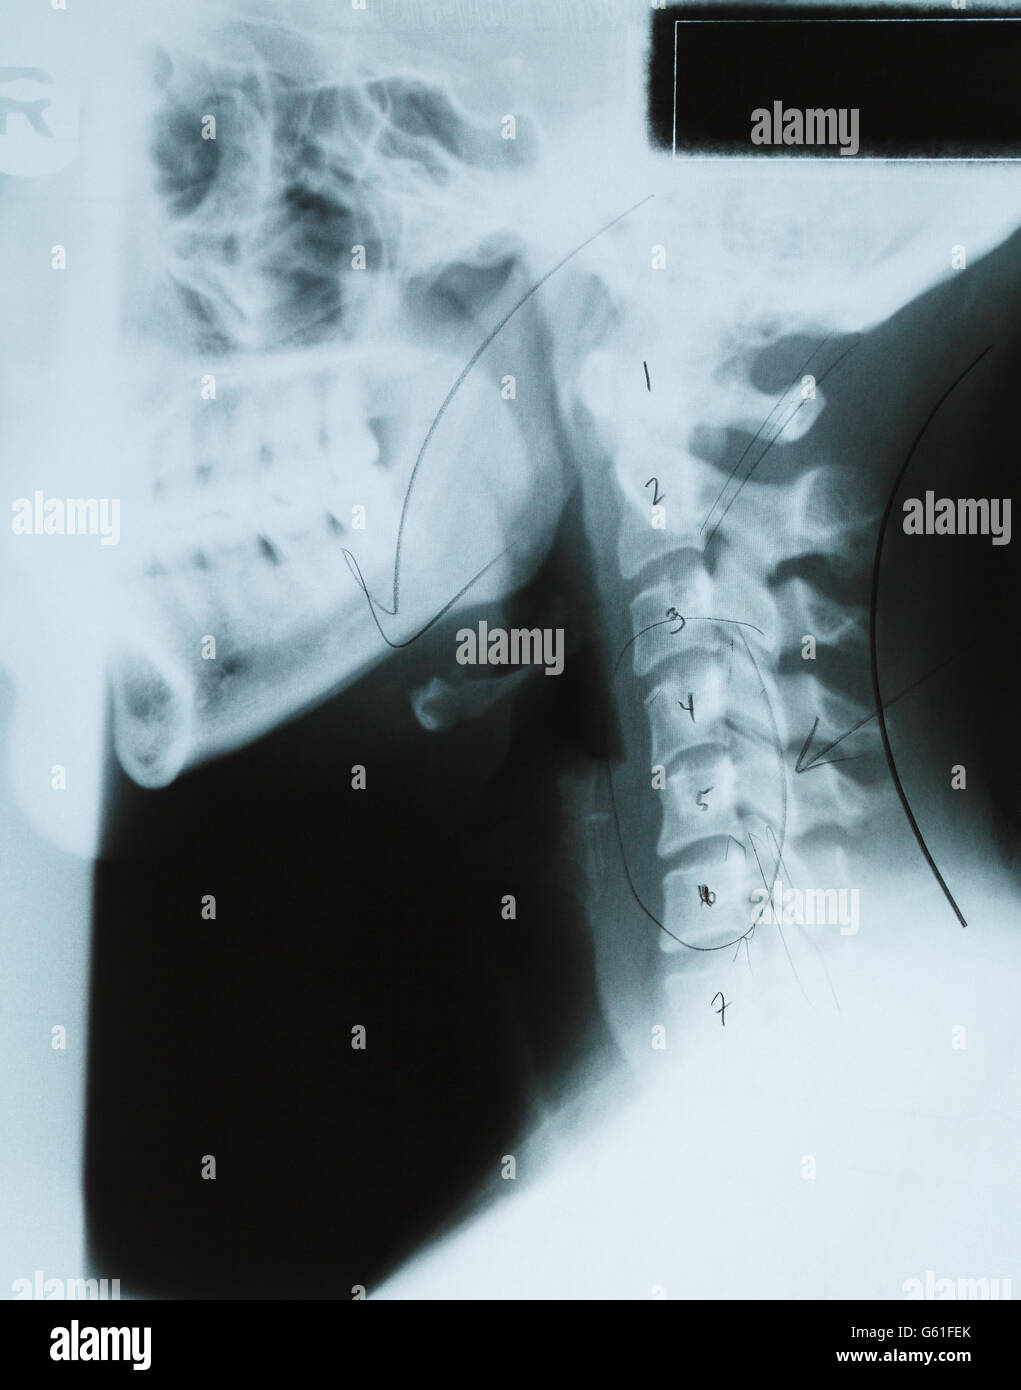 Side View X Ray of Human Neck and Head With Doctor Notes. Stock Photo